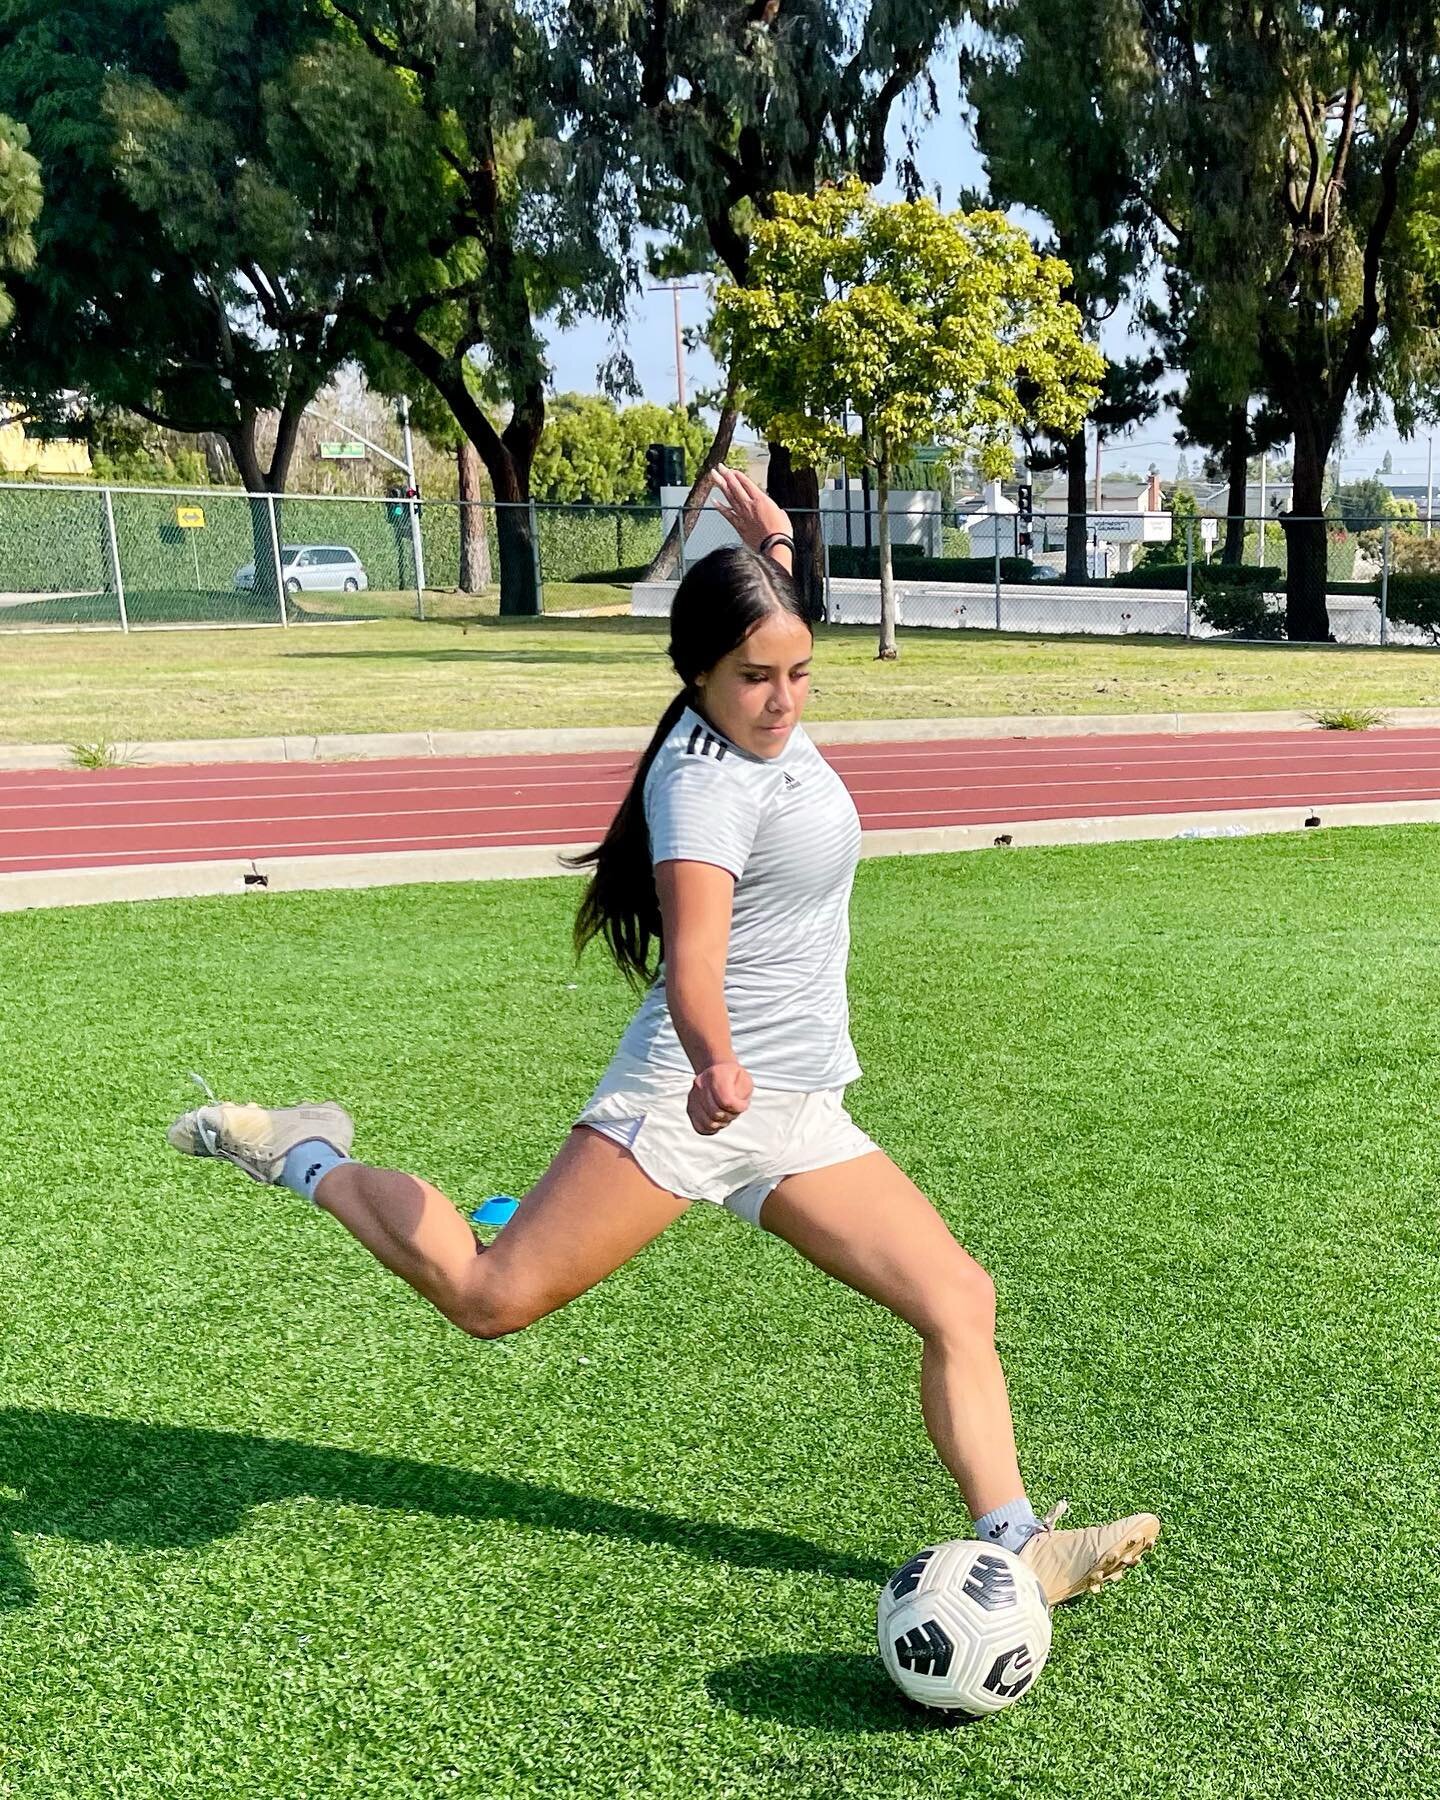 Working on technical work and striking for the weekends! @nustesitas #soccer #soccerskills #soccermoves #soccerpractice #soccer-training #soccerplayer #soccerislife #soccerlife #soccerstars #soccertime #soccergame #soccerfan #soccerlove #soccercoach 